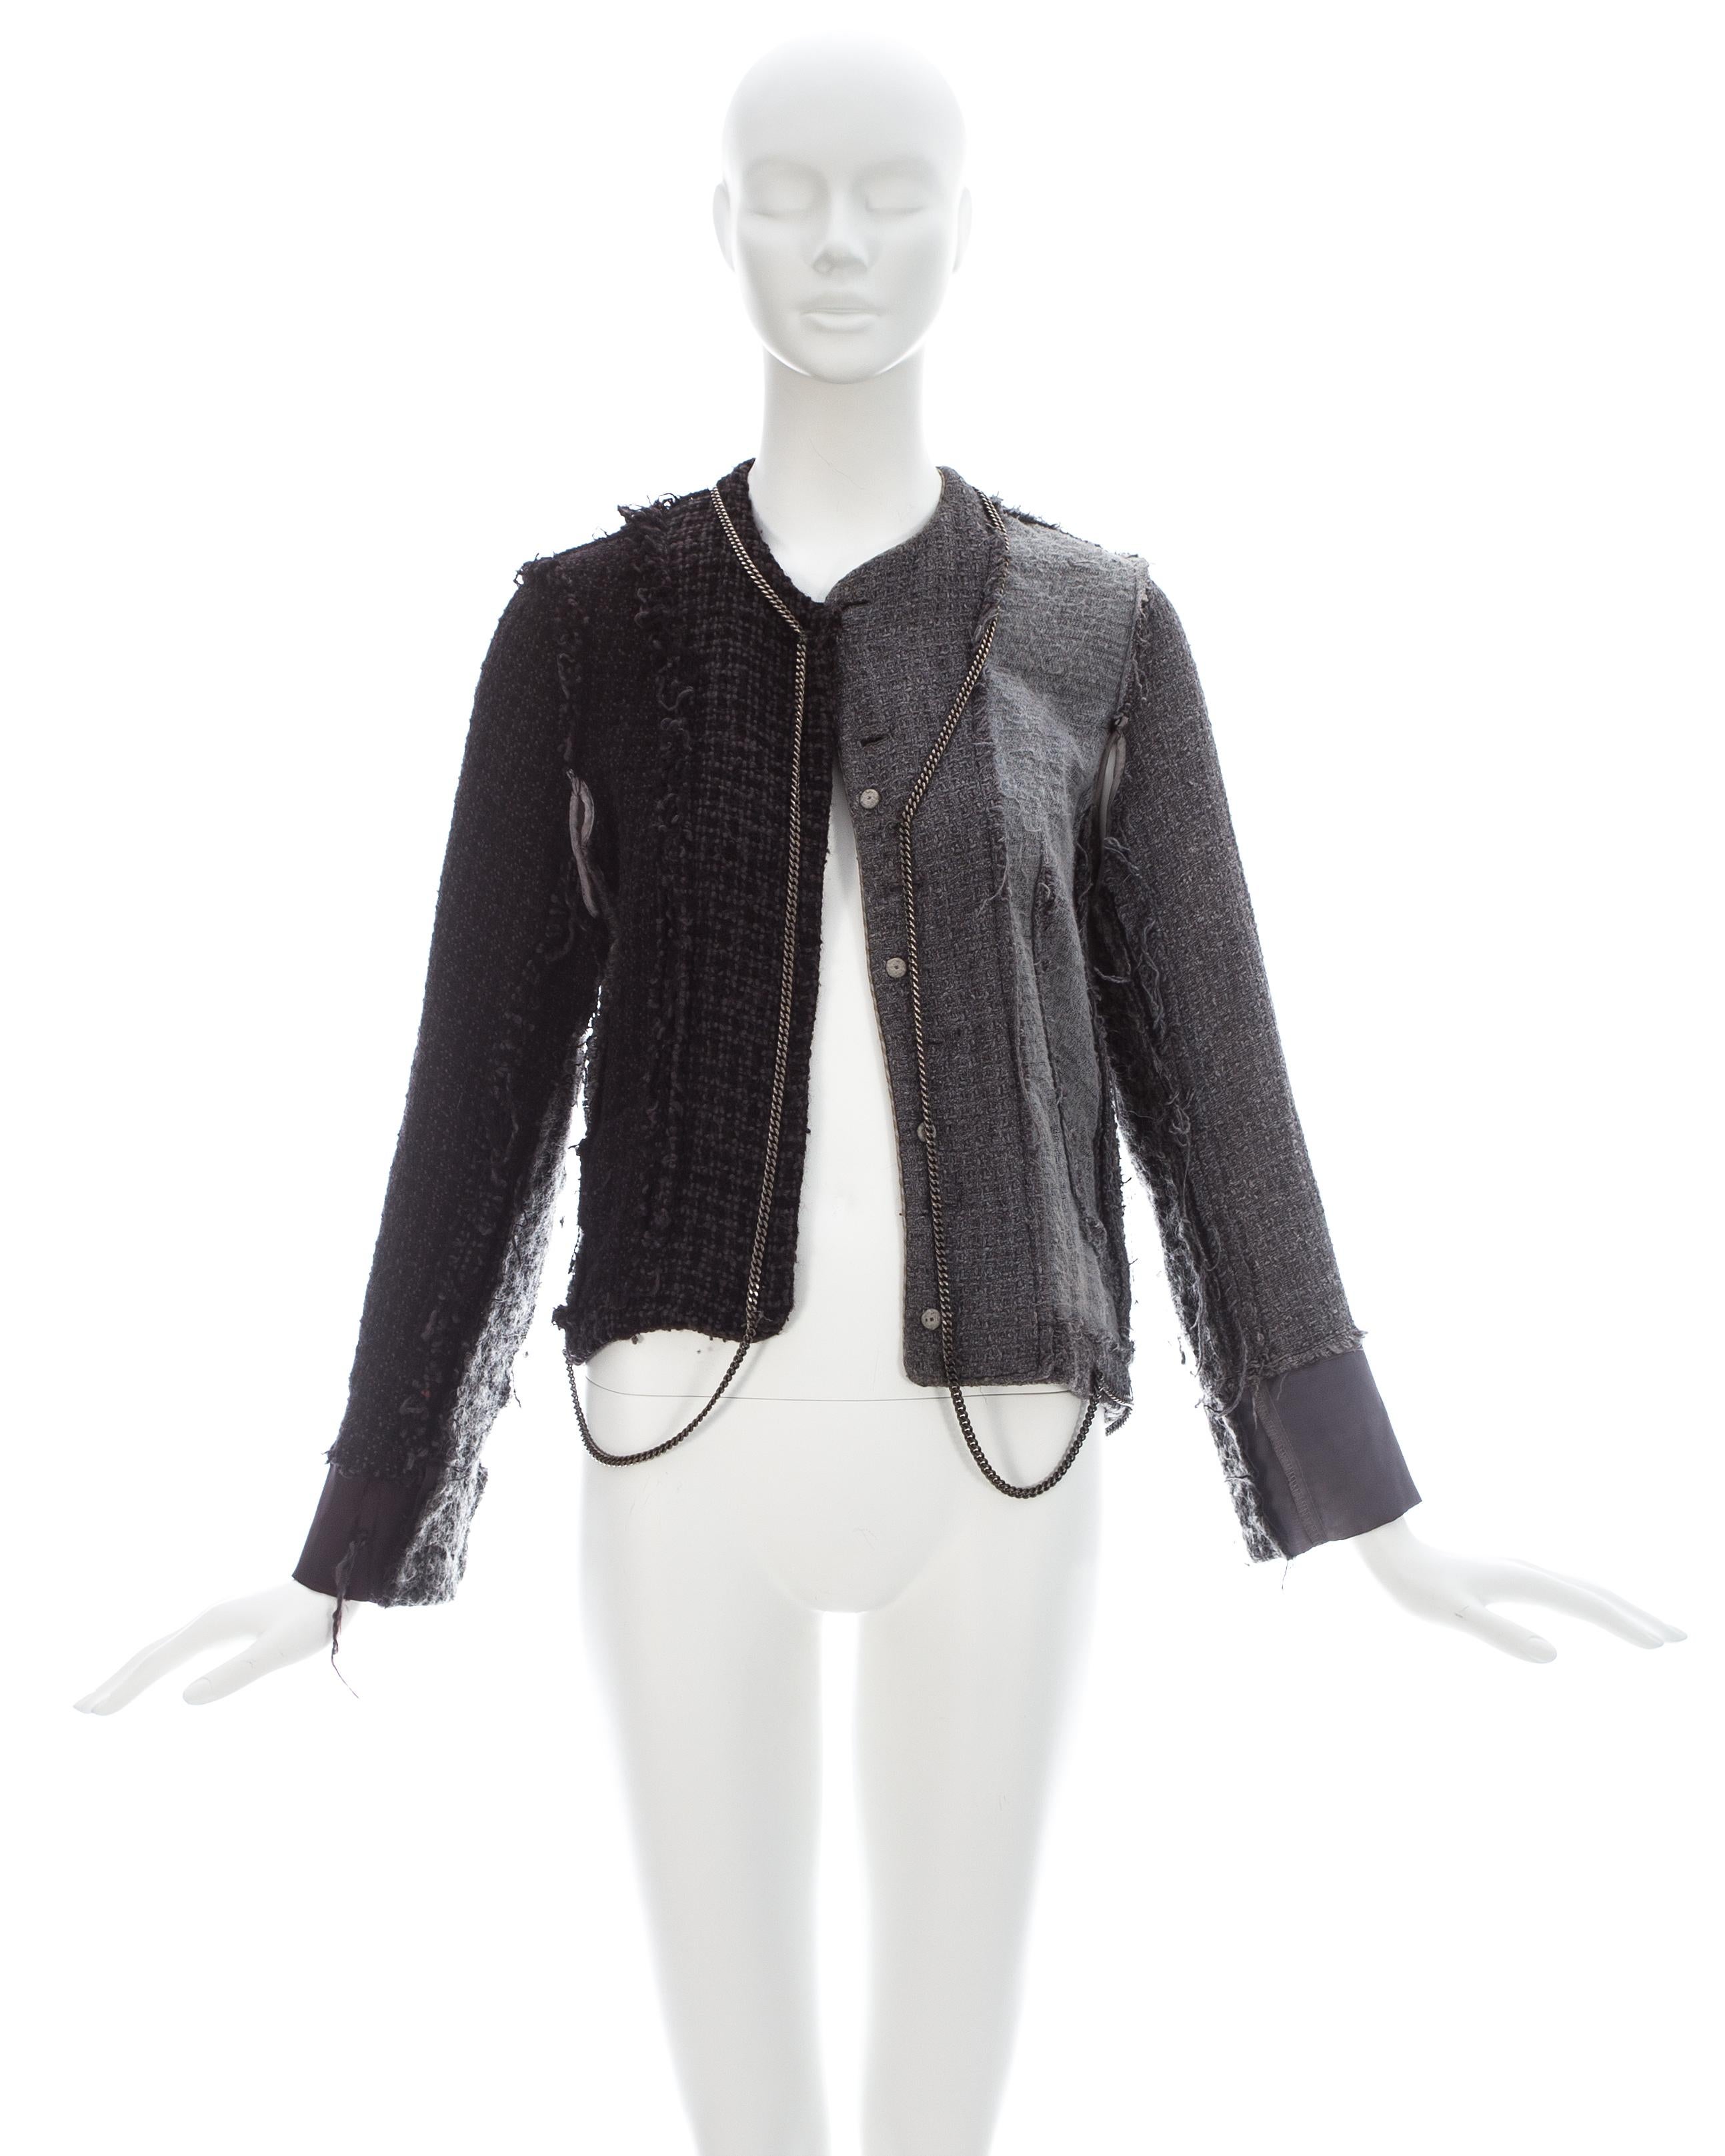 Margiela; Grey wool tweed reconstructed vintage jacket with decorative metal chains, exposed frayed seams, and snap button closures 

Fall-Winter 2004